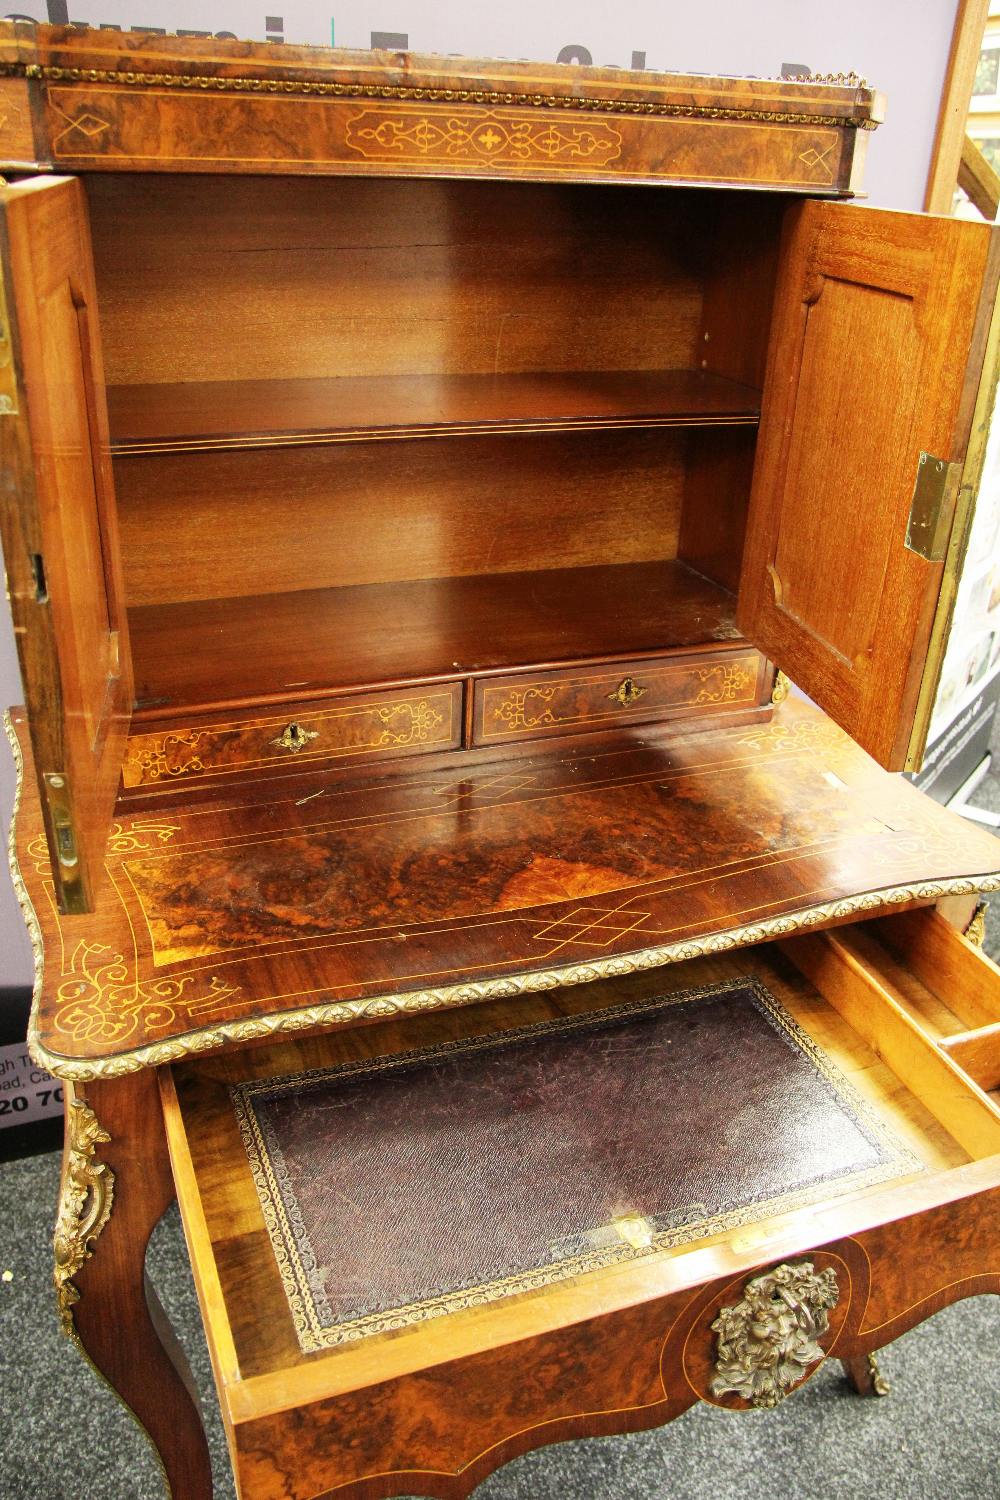 A FINE C19TH WALNUT ESCRITOIRE, having a base of single drawer and upper section of two drawers - Image 3 of 11